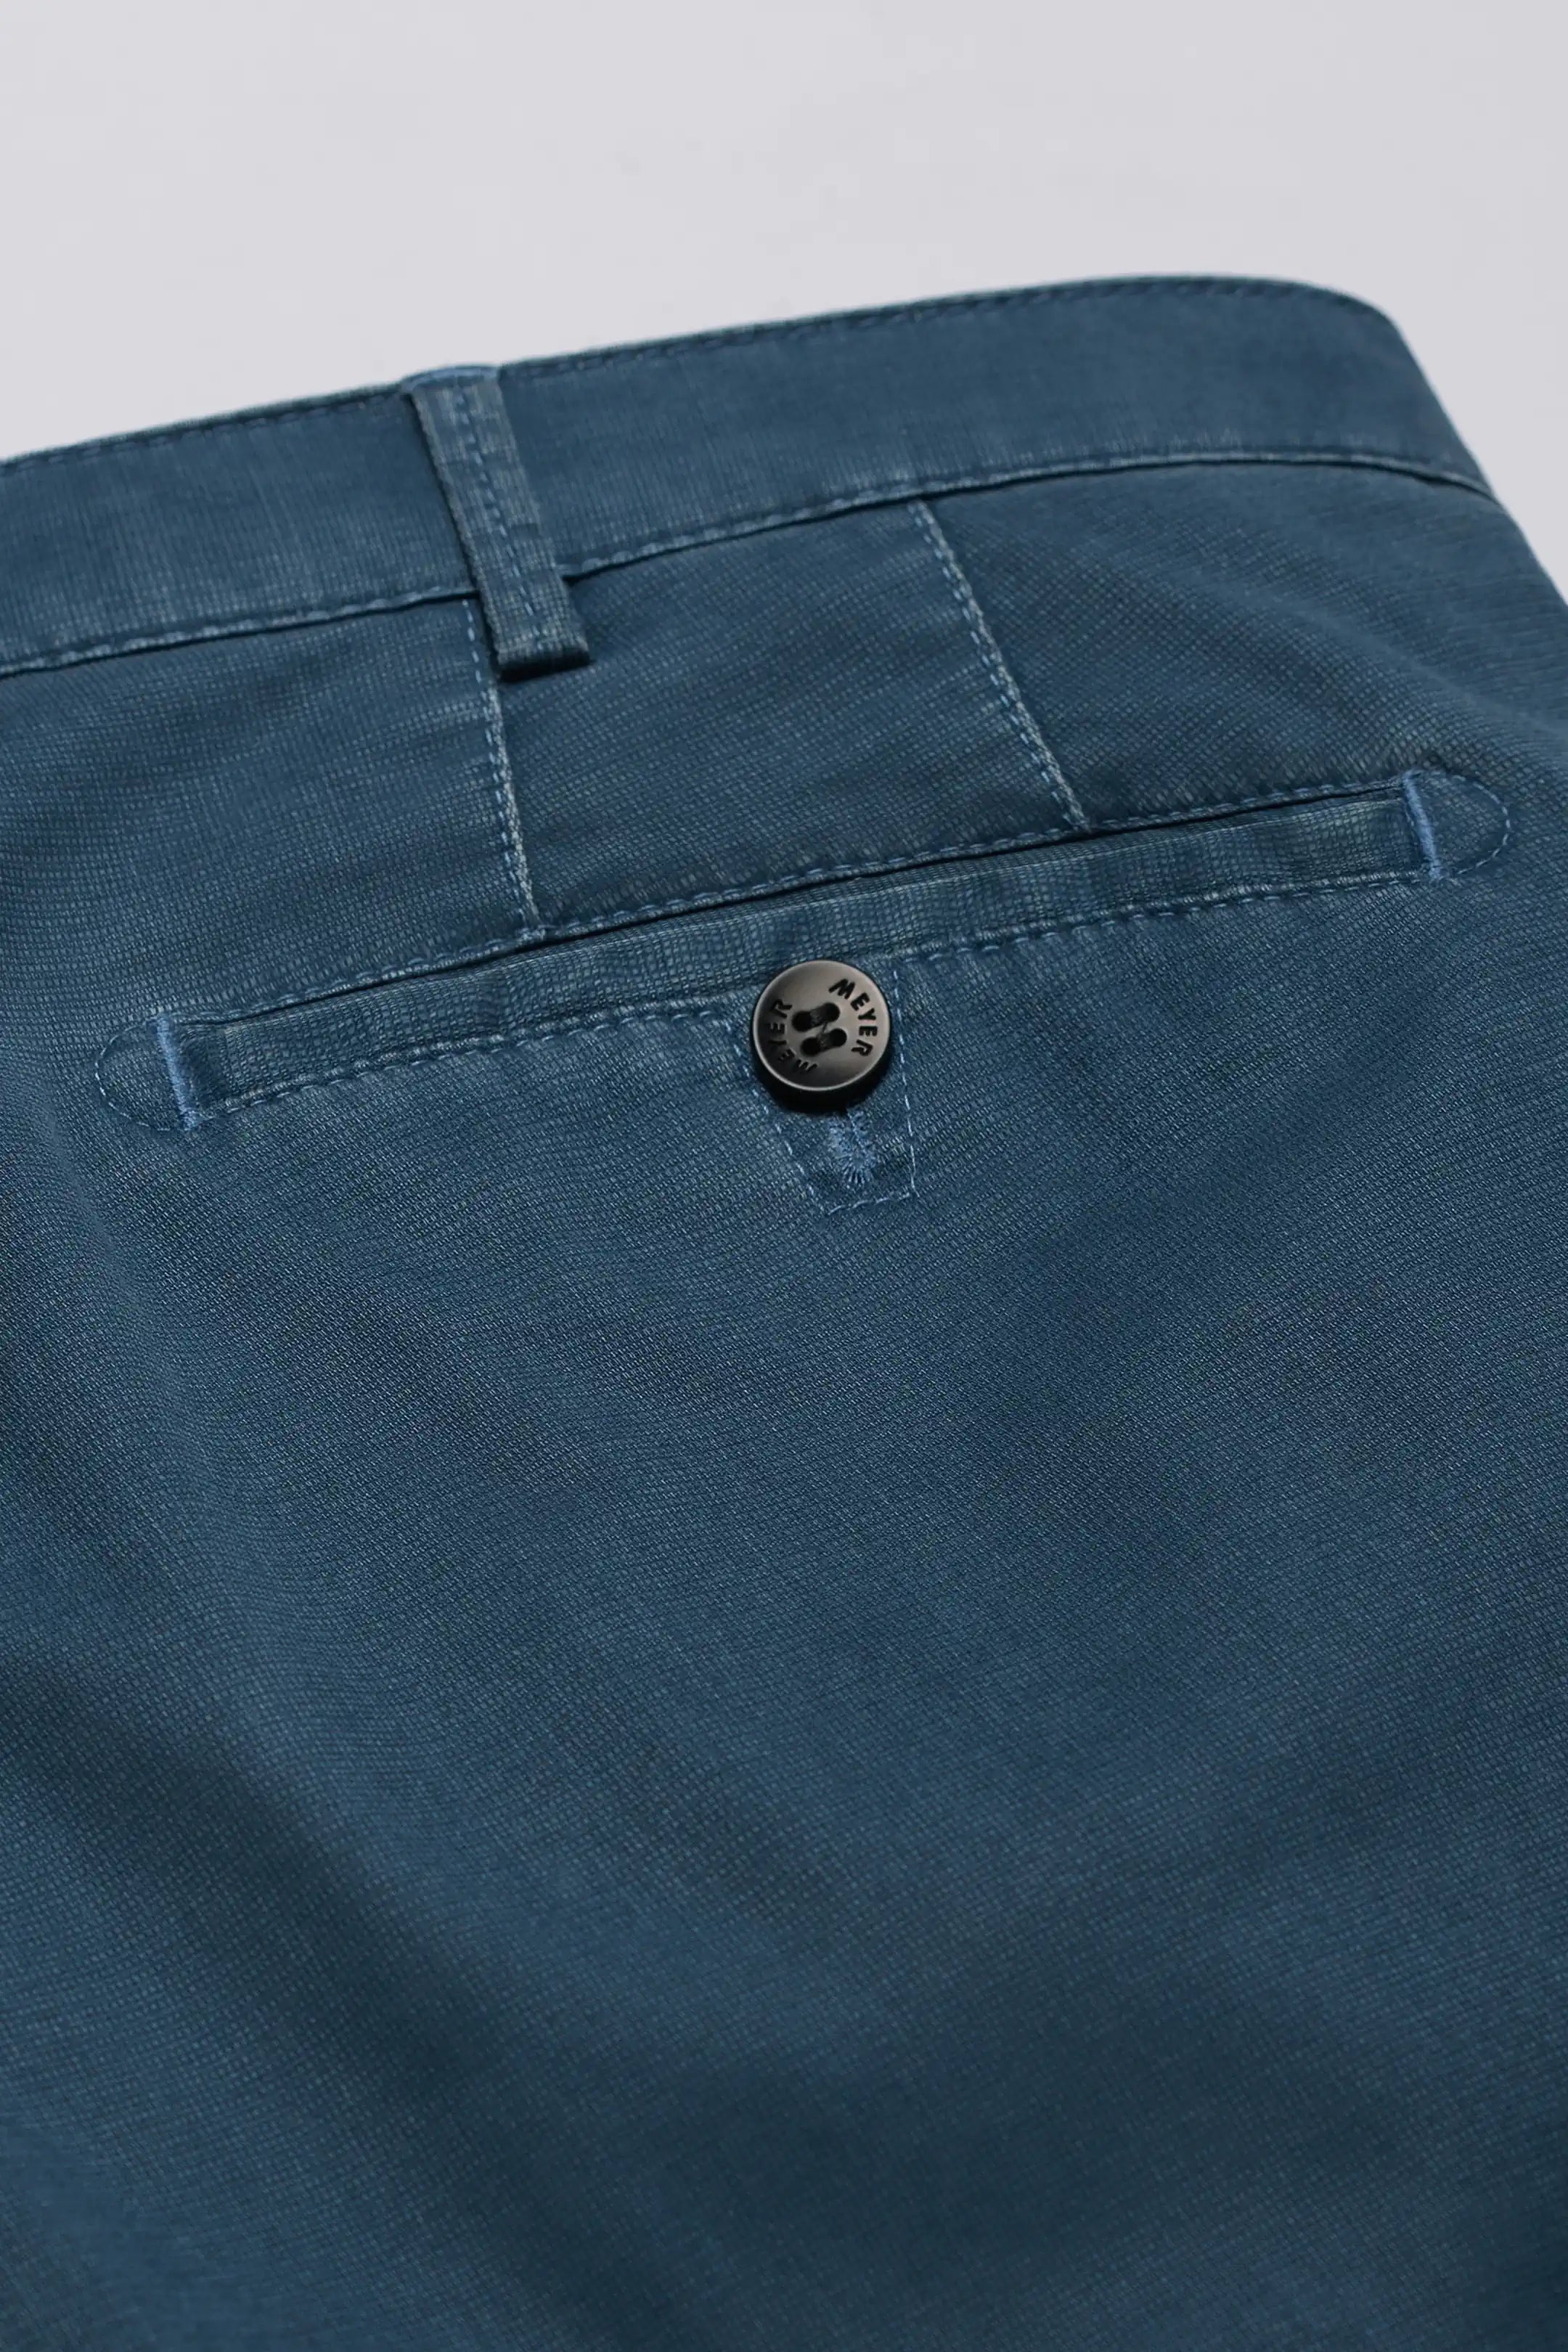 30% OFF - MEYER Roma Trousers - 5058 Liberty Fabric Cotton Chinos - Blue